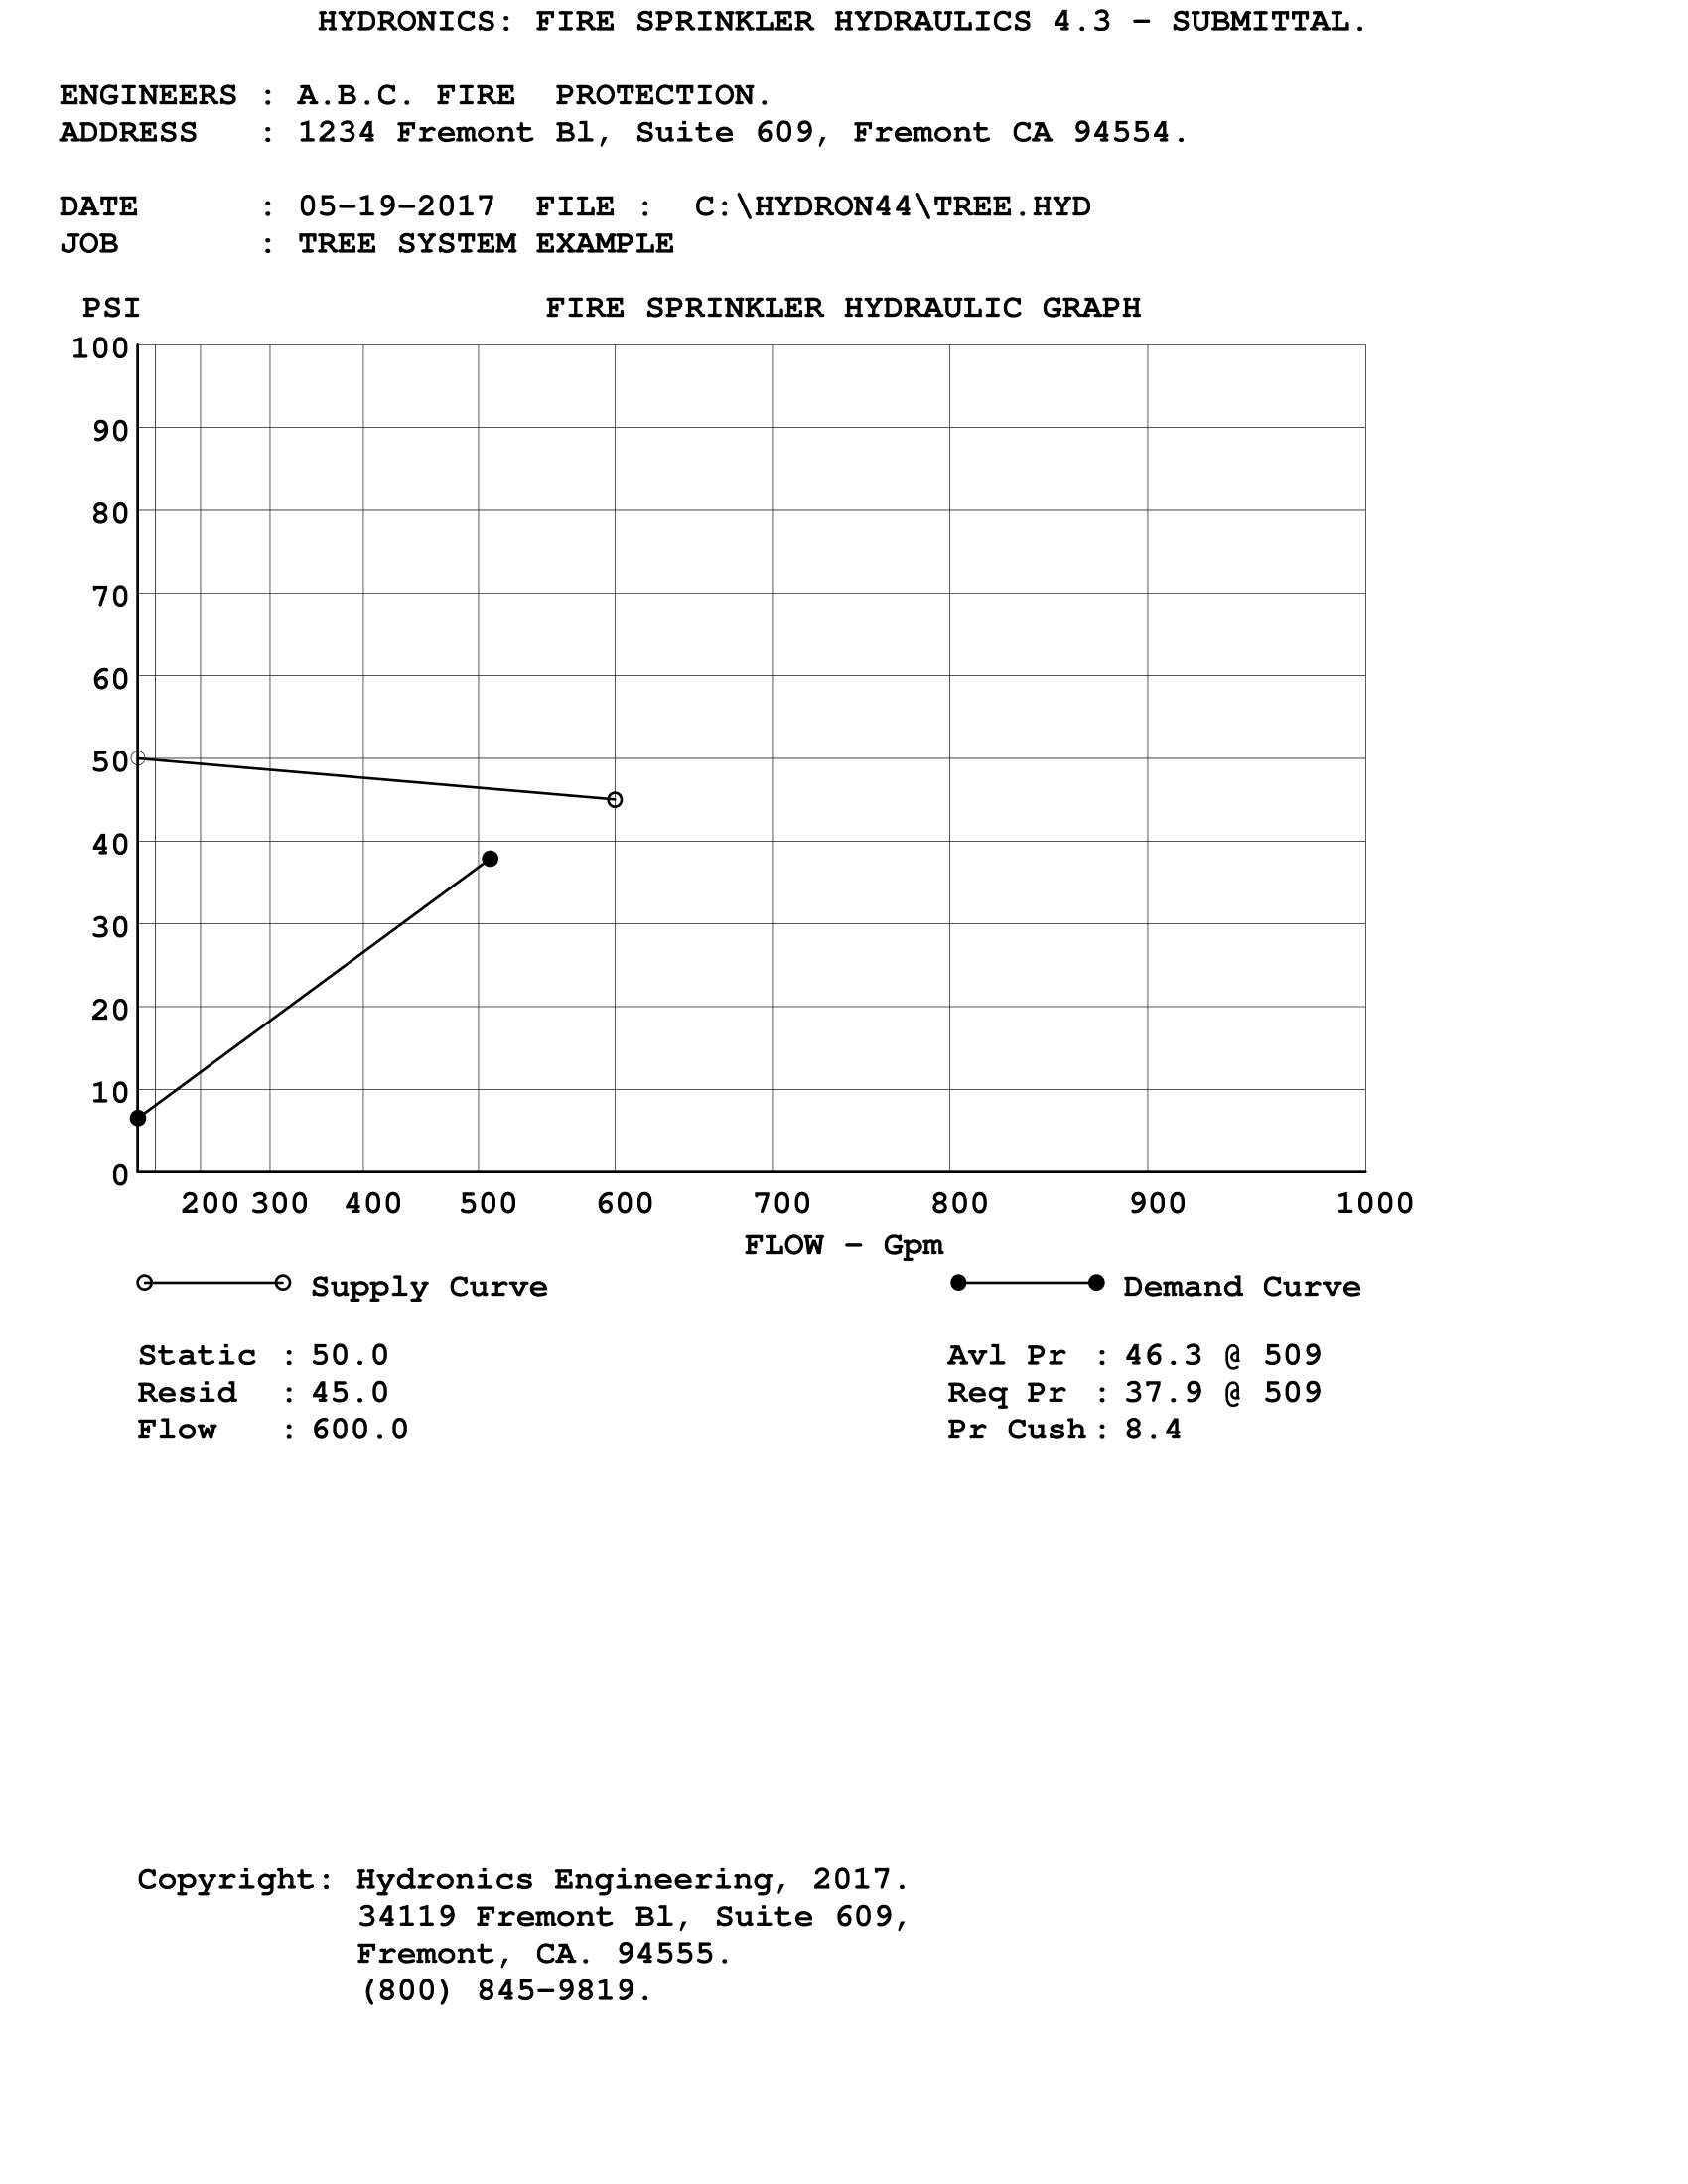 Submittal Graph